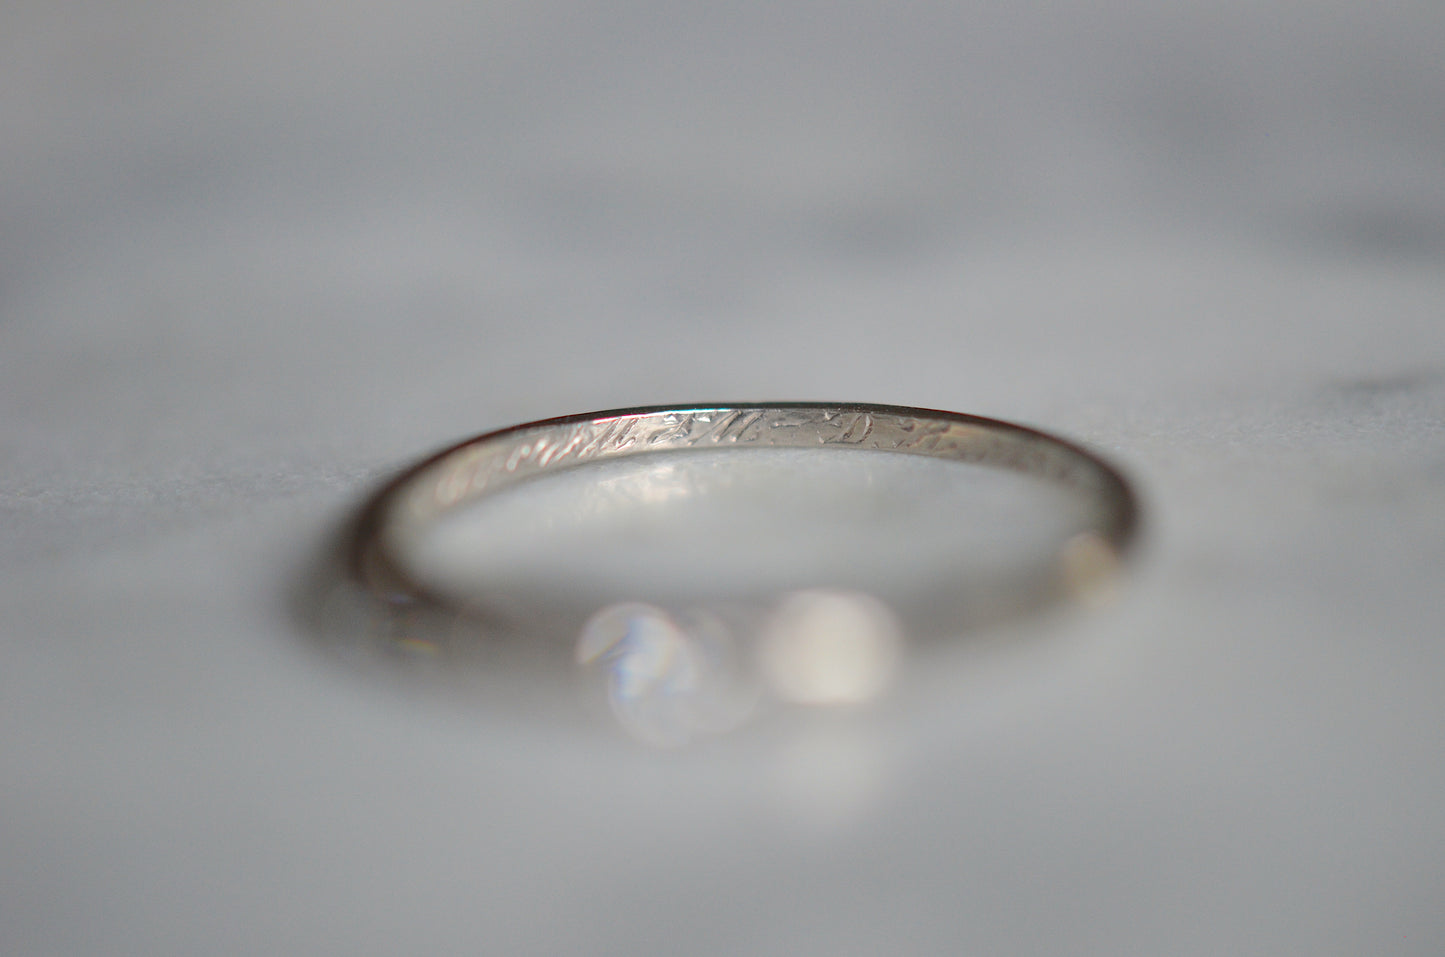 Unique and Sentimental Wartime Wedding Band